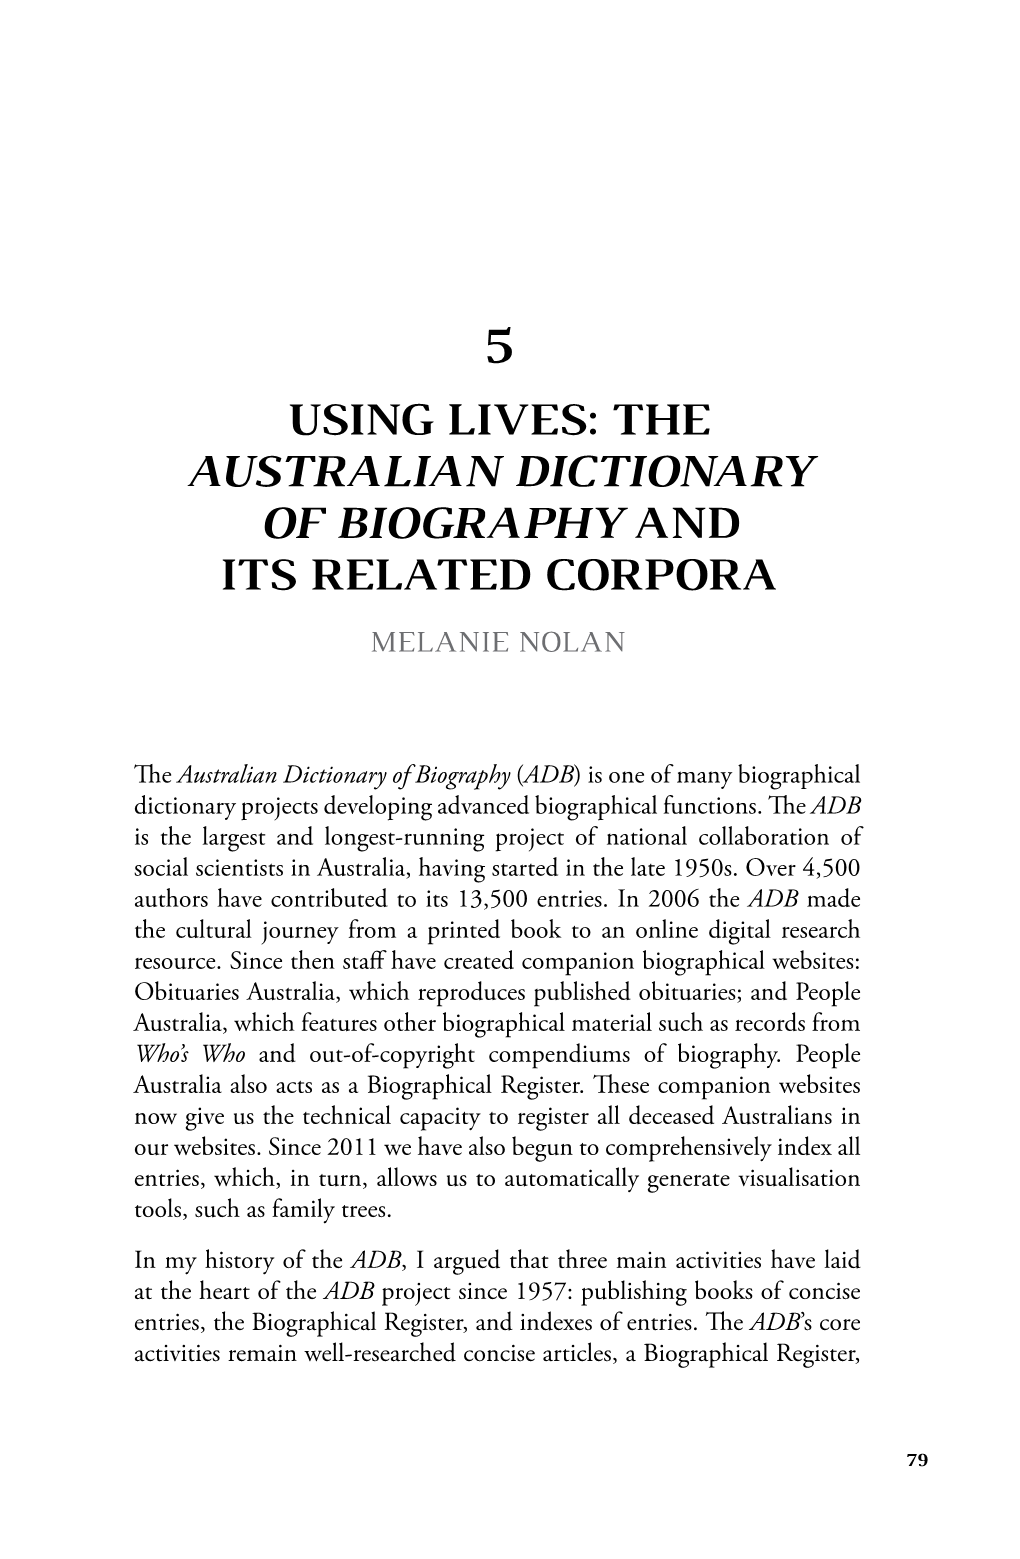 The Australian Dictionary of Biography and Its Related Corpora Melanie Nolan